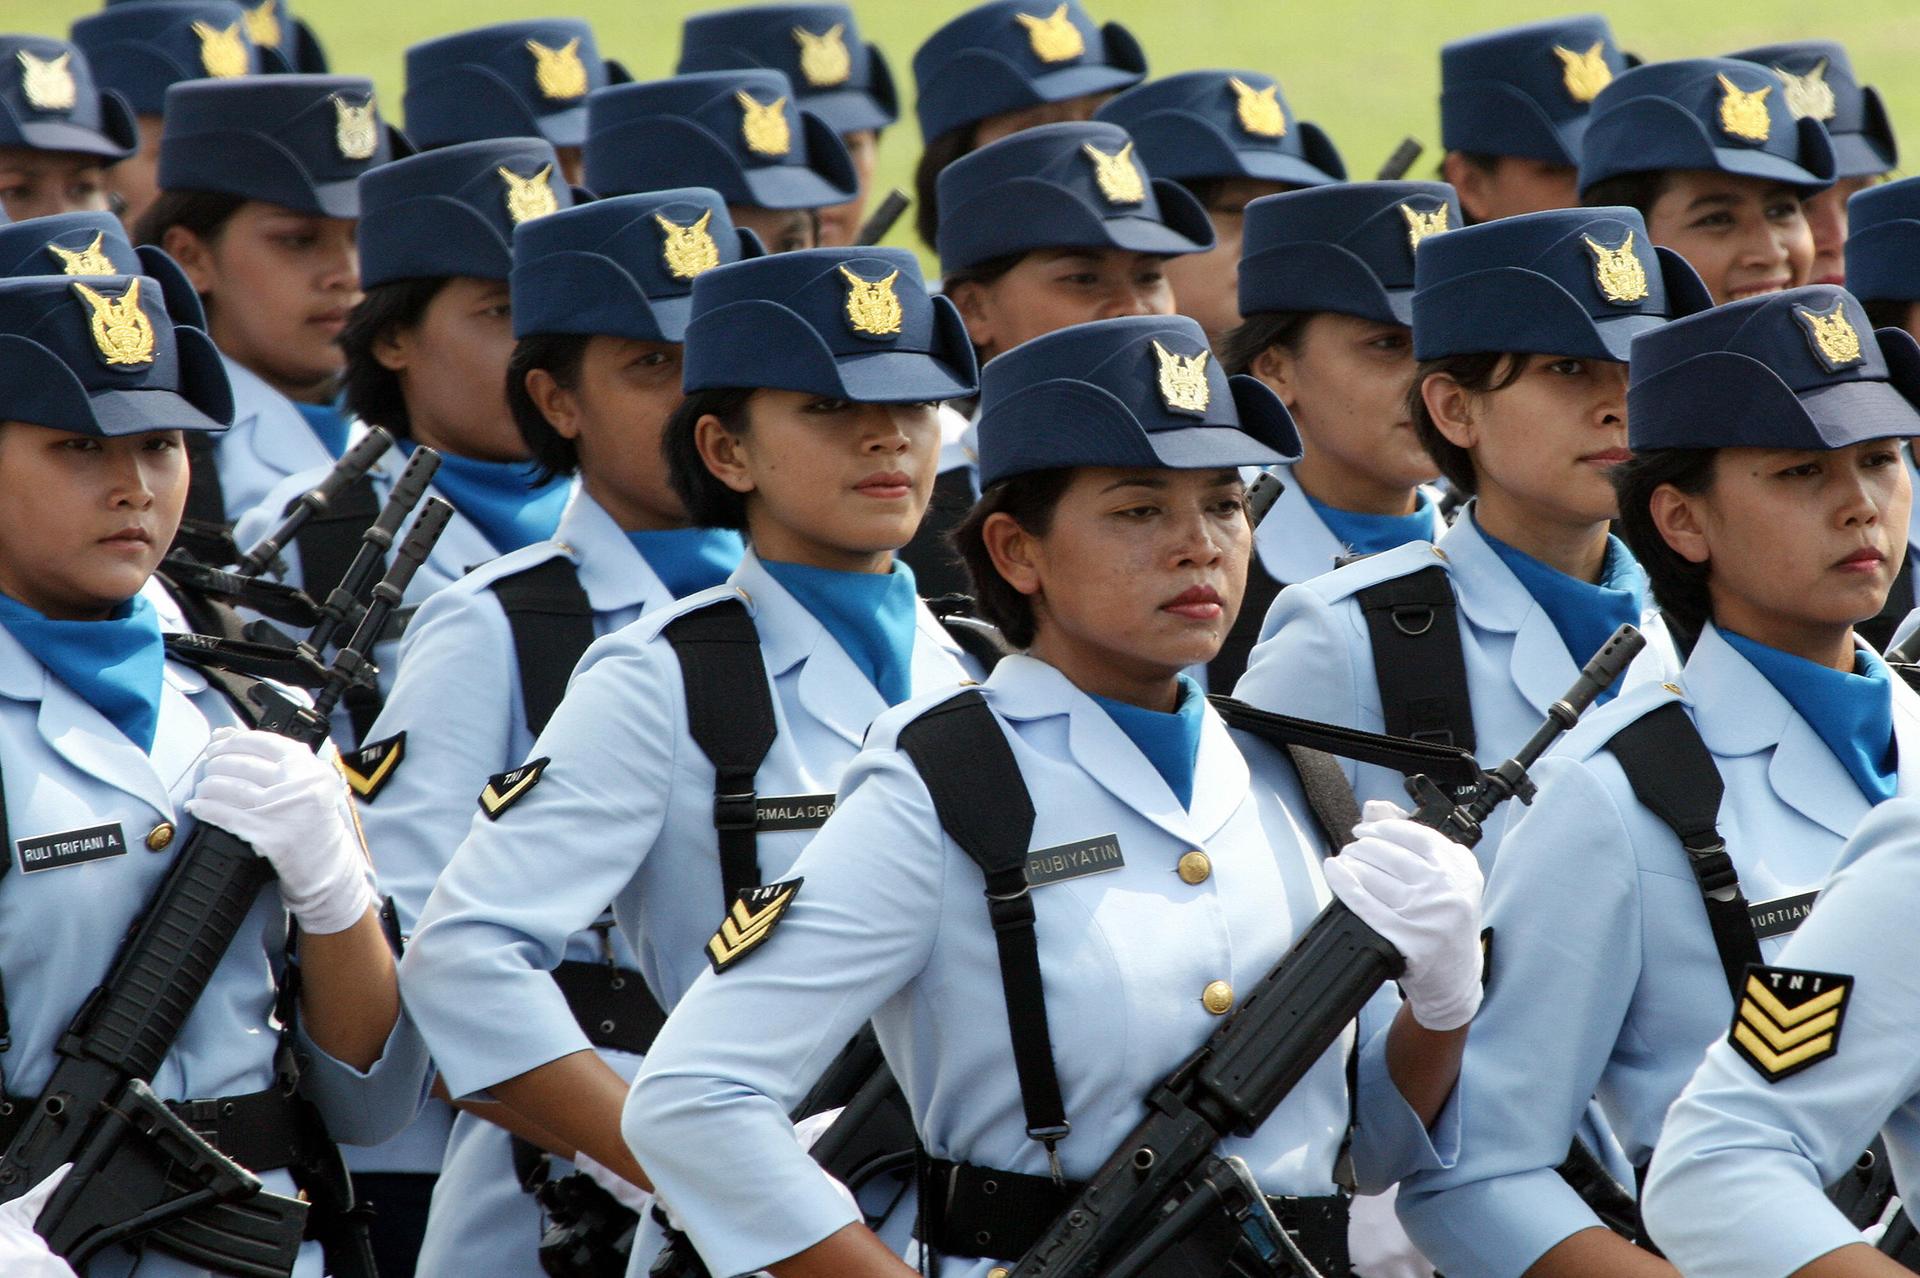 Indonesian Air Force soldiers parade during a ceremony in Jakarta in 2007.